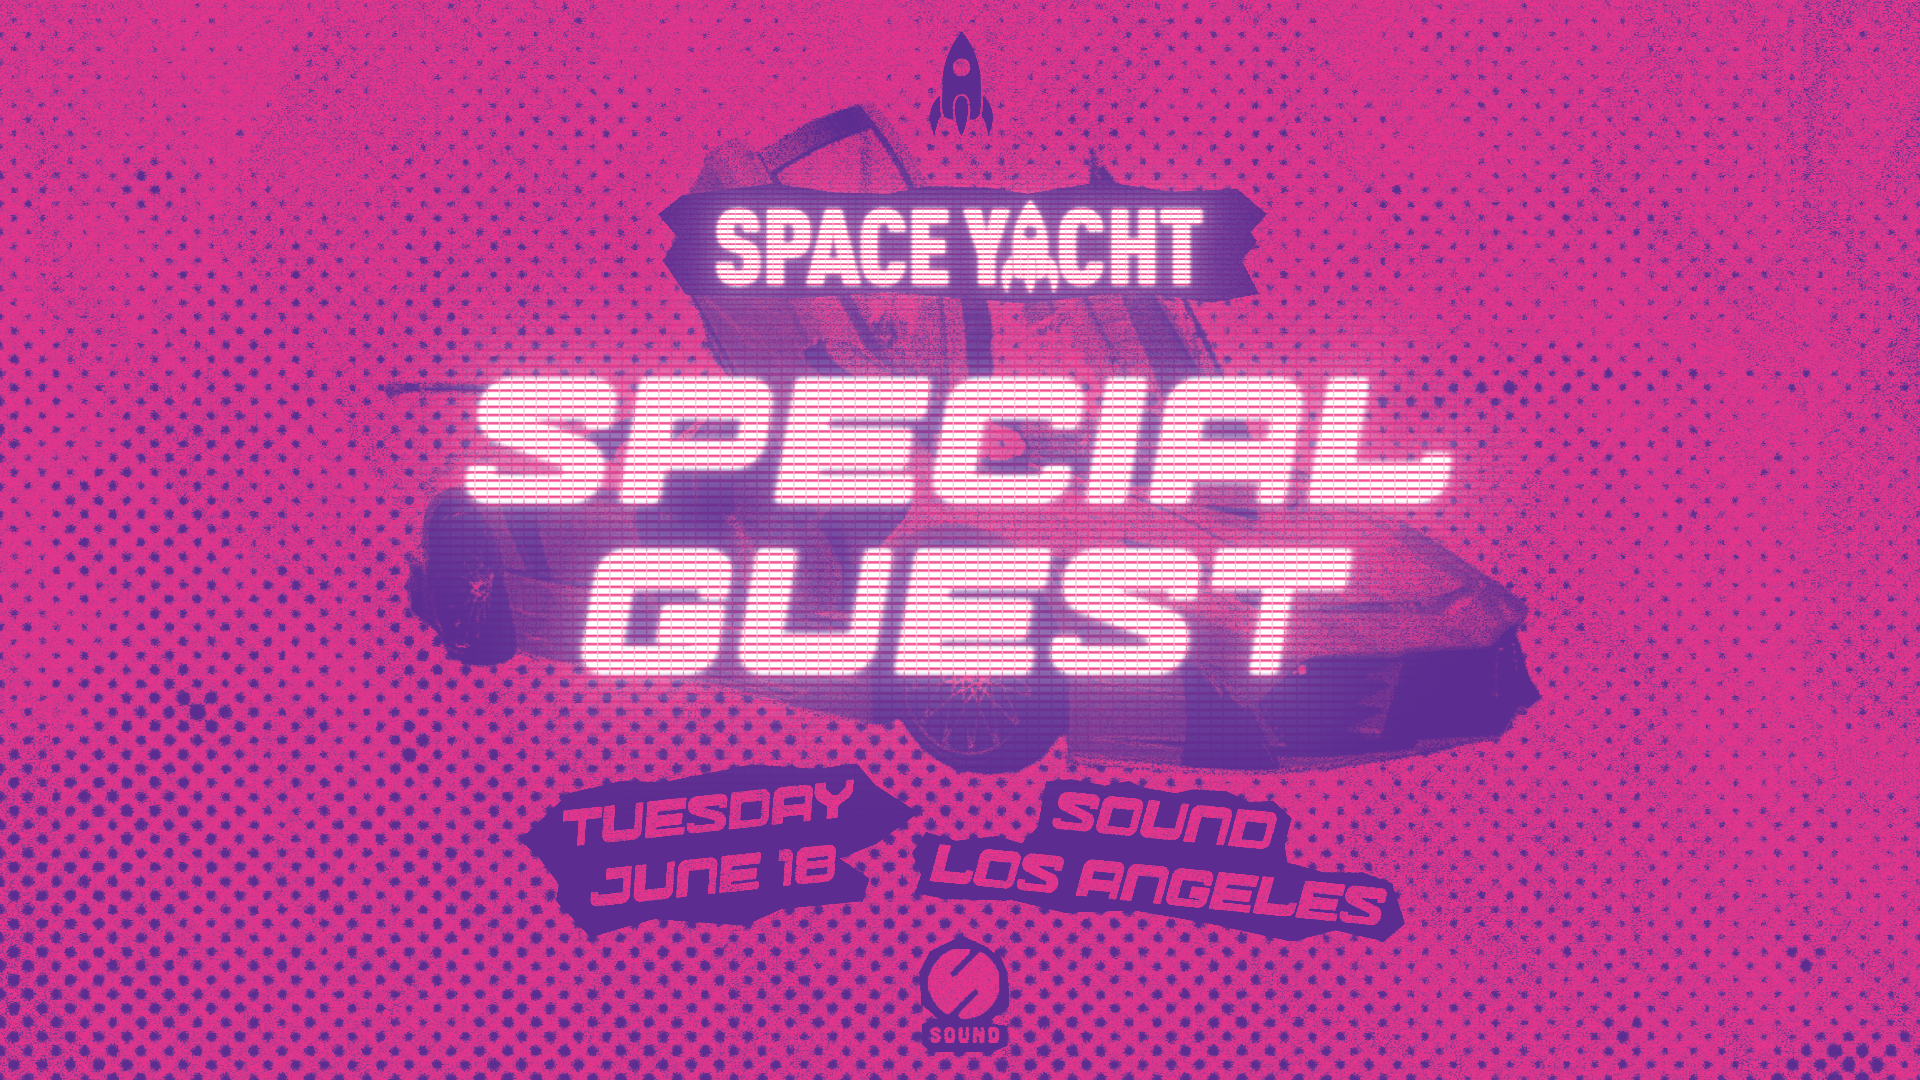 Space Yacht: Special Guest - Página frontal